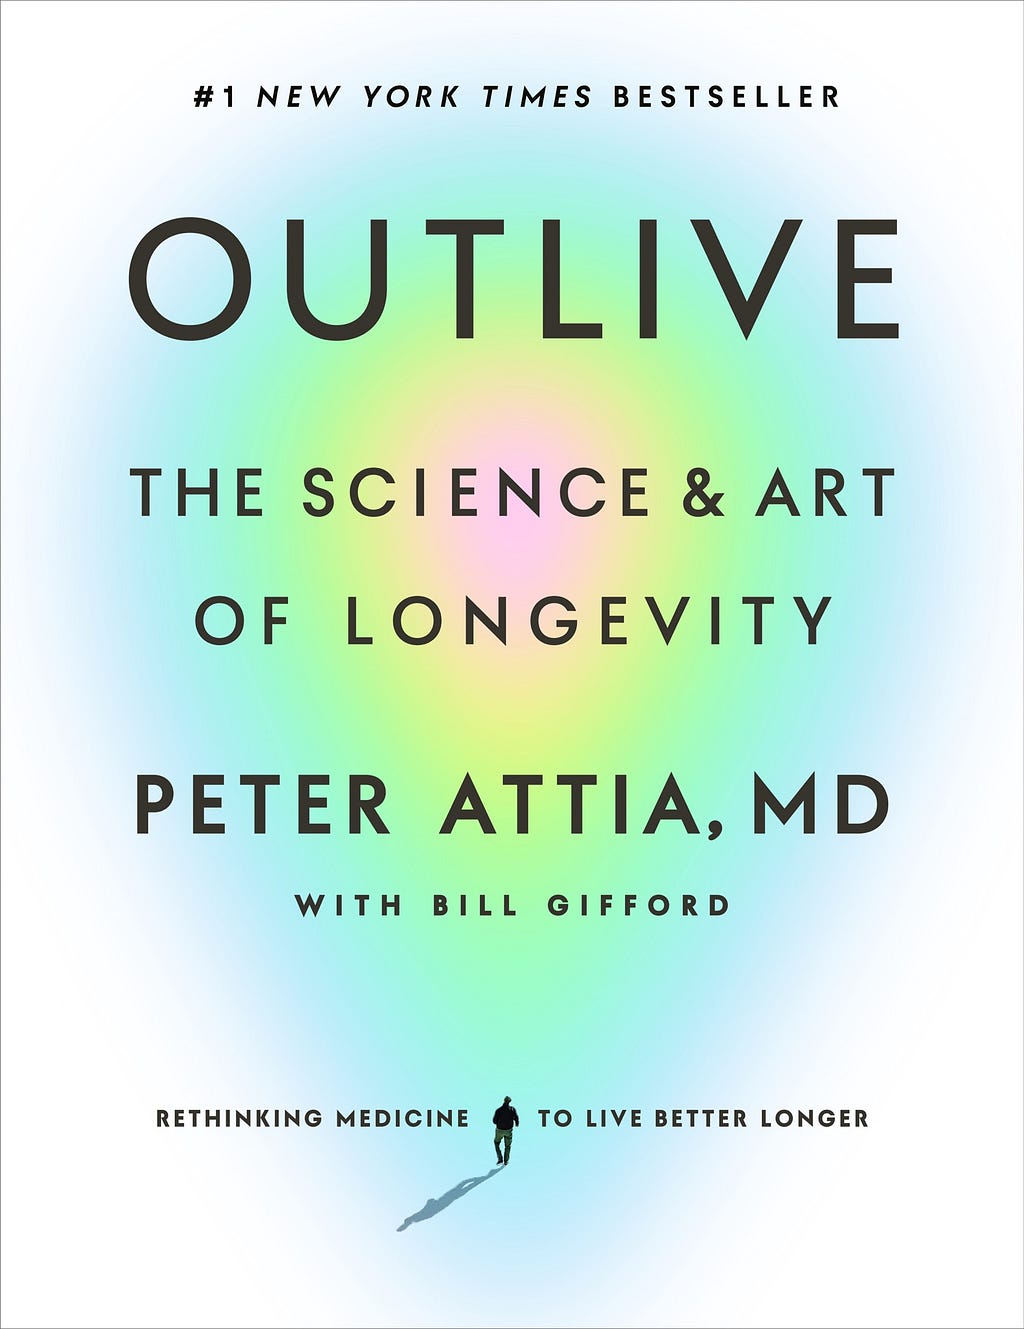 [Audiobooks] DOWNLOAD -Outlive by Peter Attia, MD & Bill Gifford